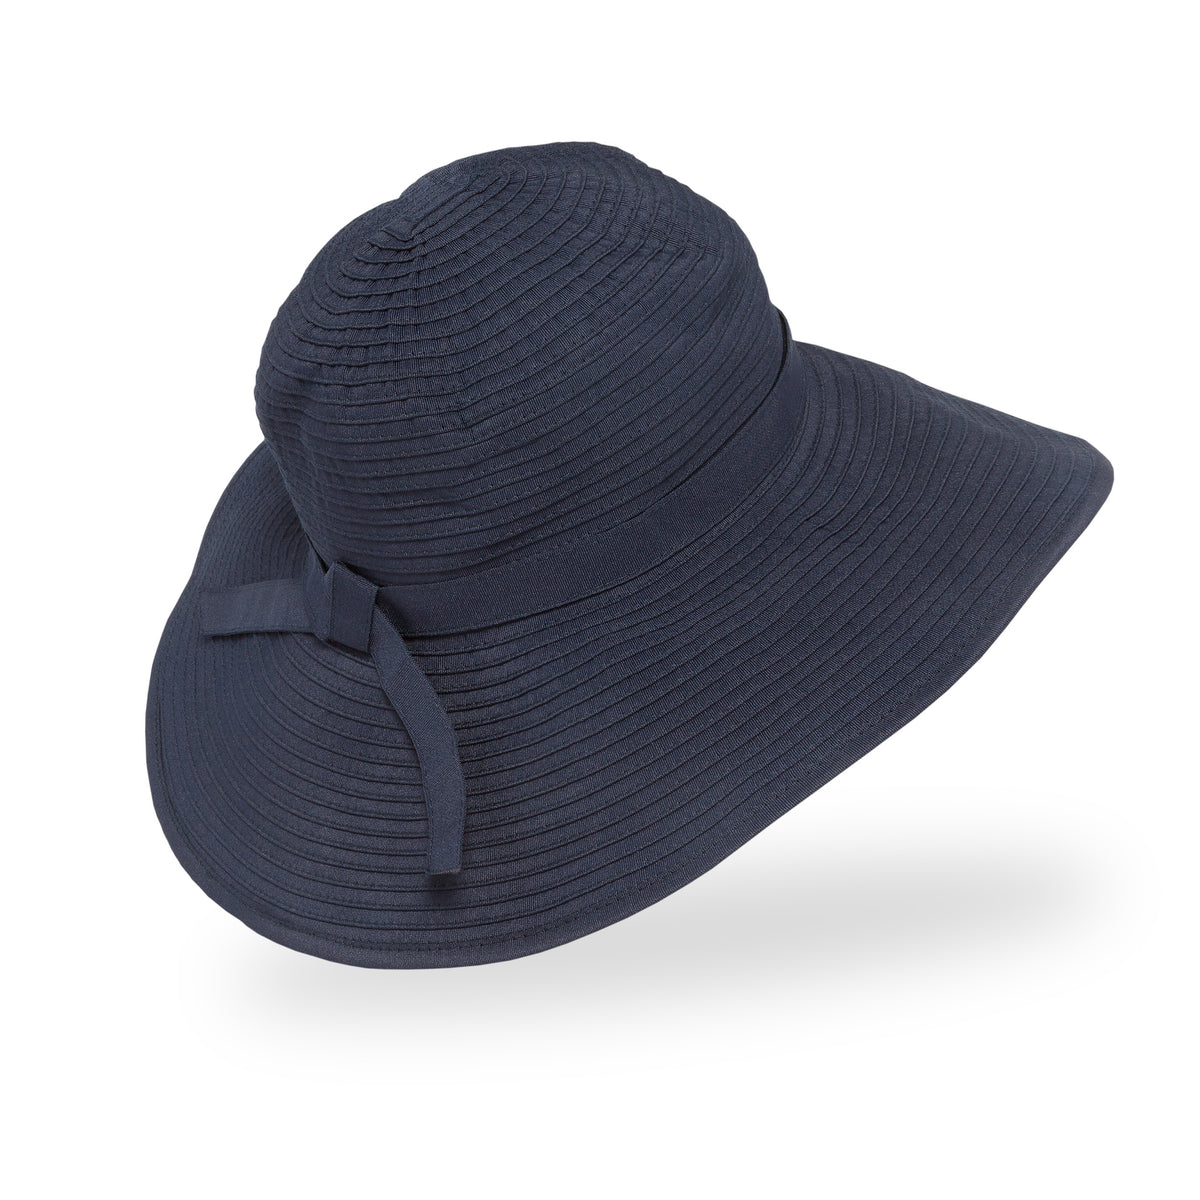 Sunday Afternoons Women's Beach Hat - Navy